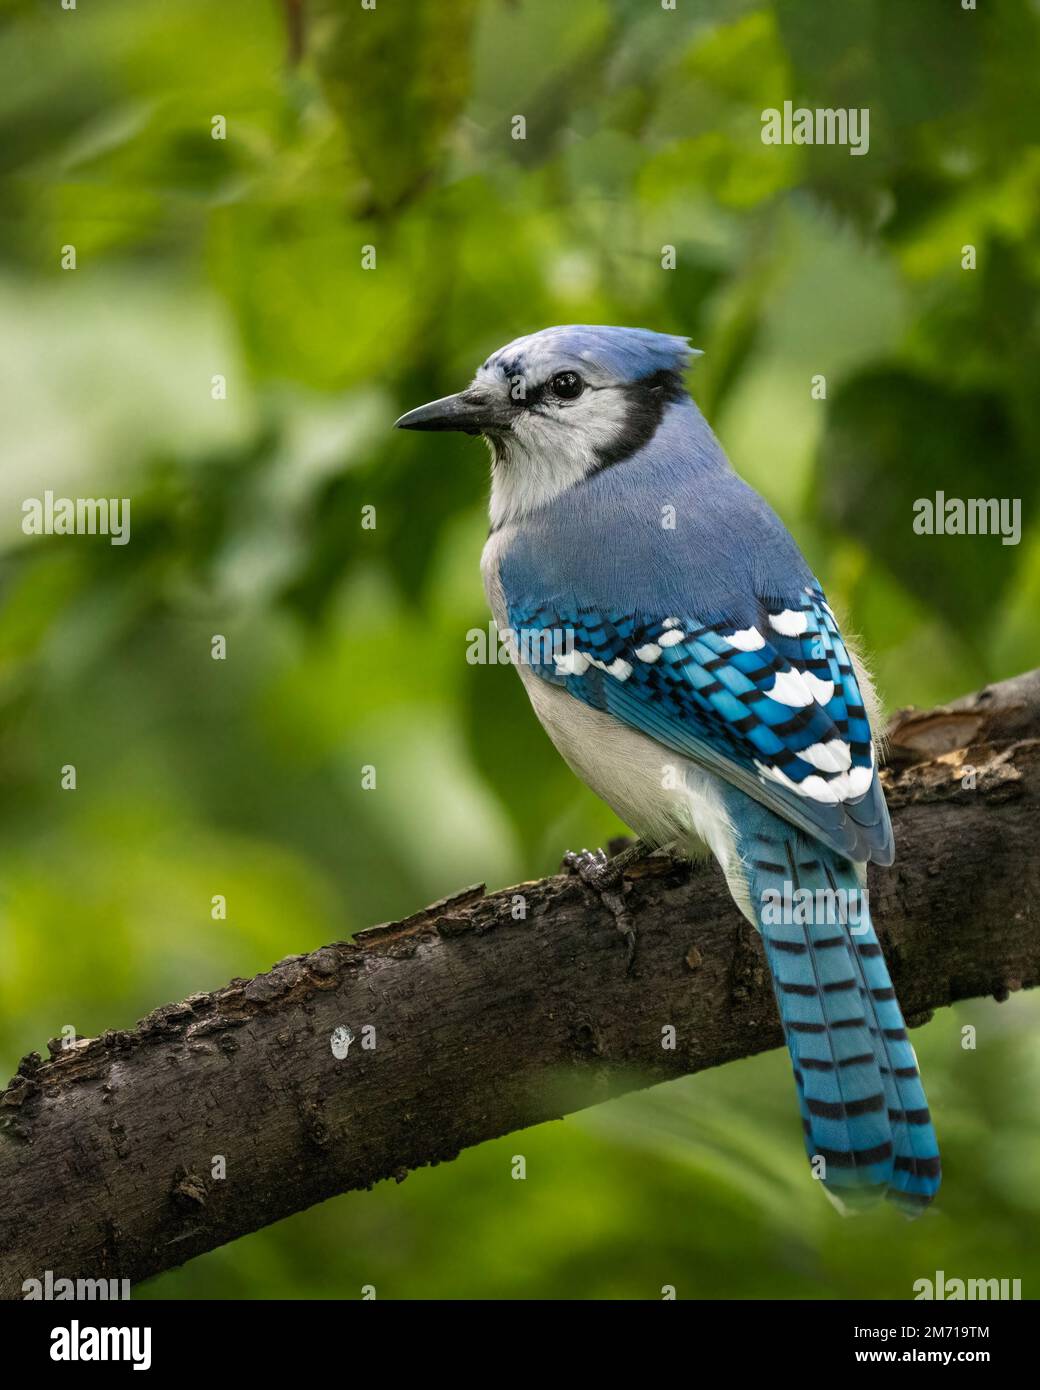 A vertical closeup shot of a blue jay bird perched on a wooden tree branch Stock Photo